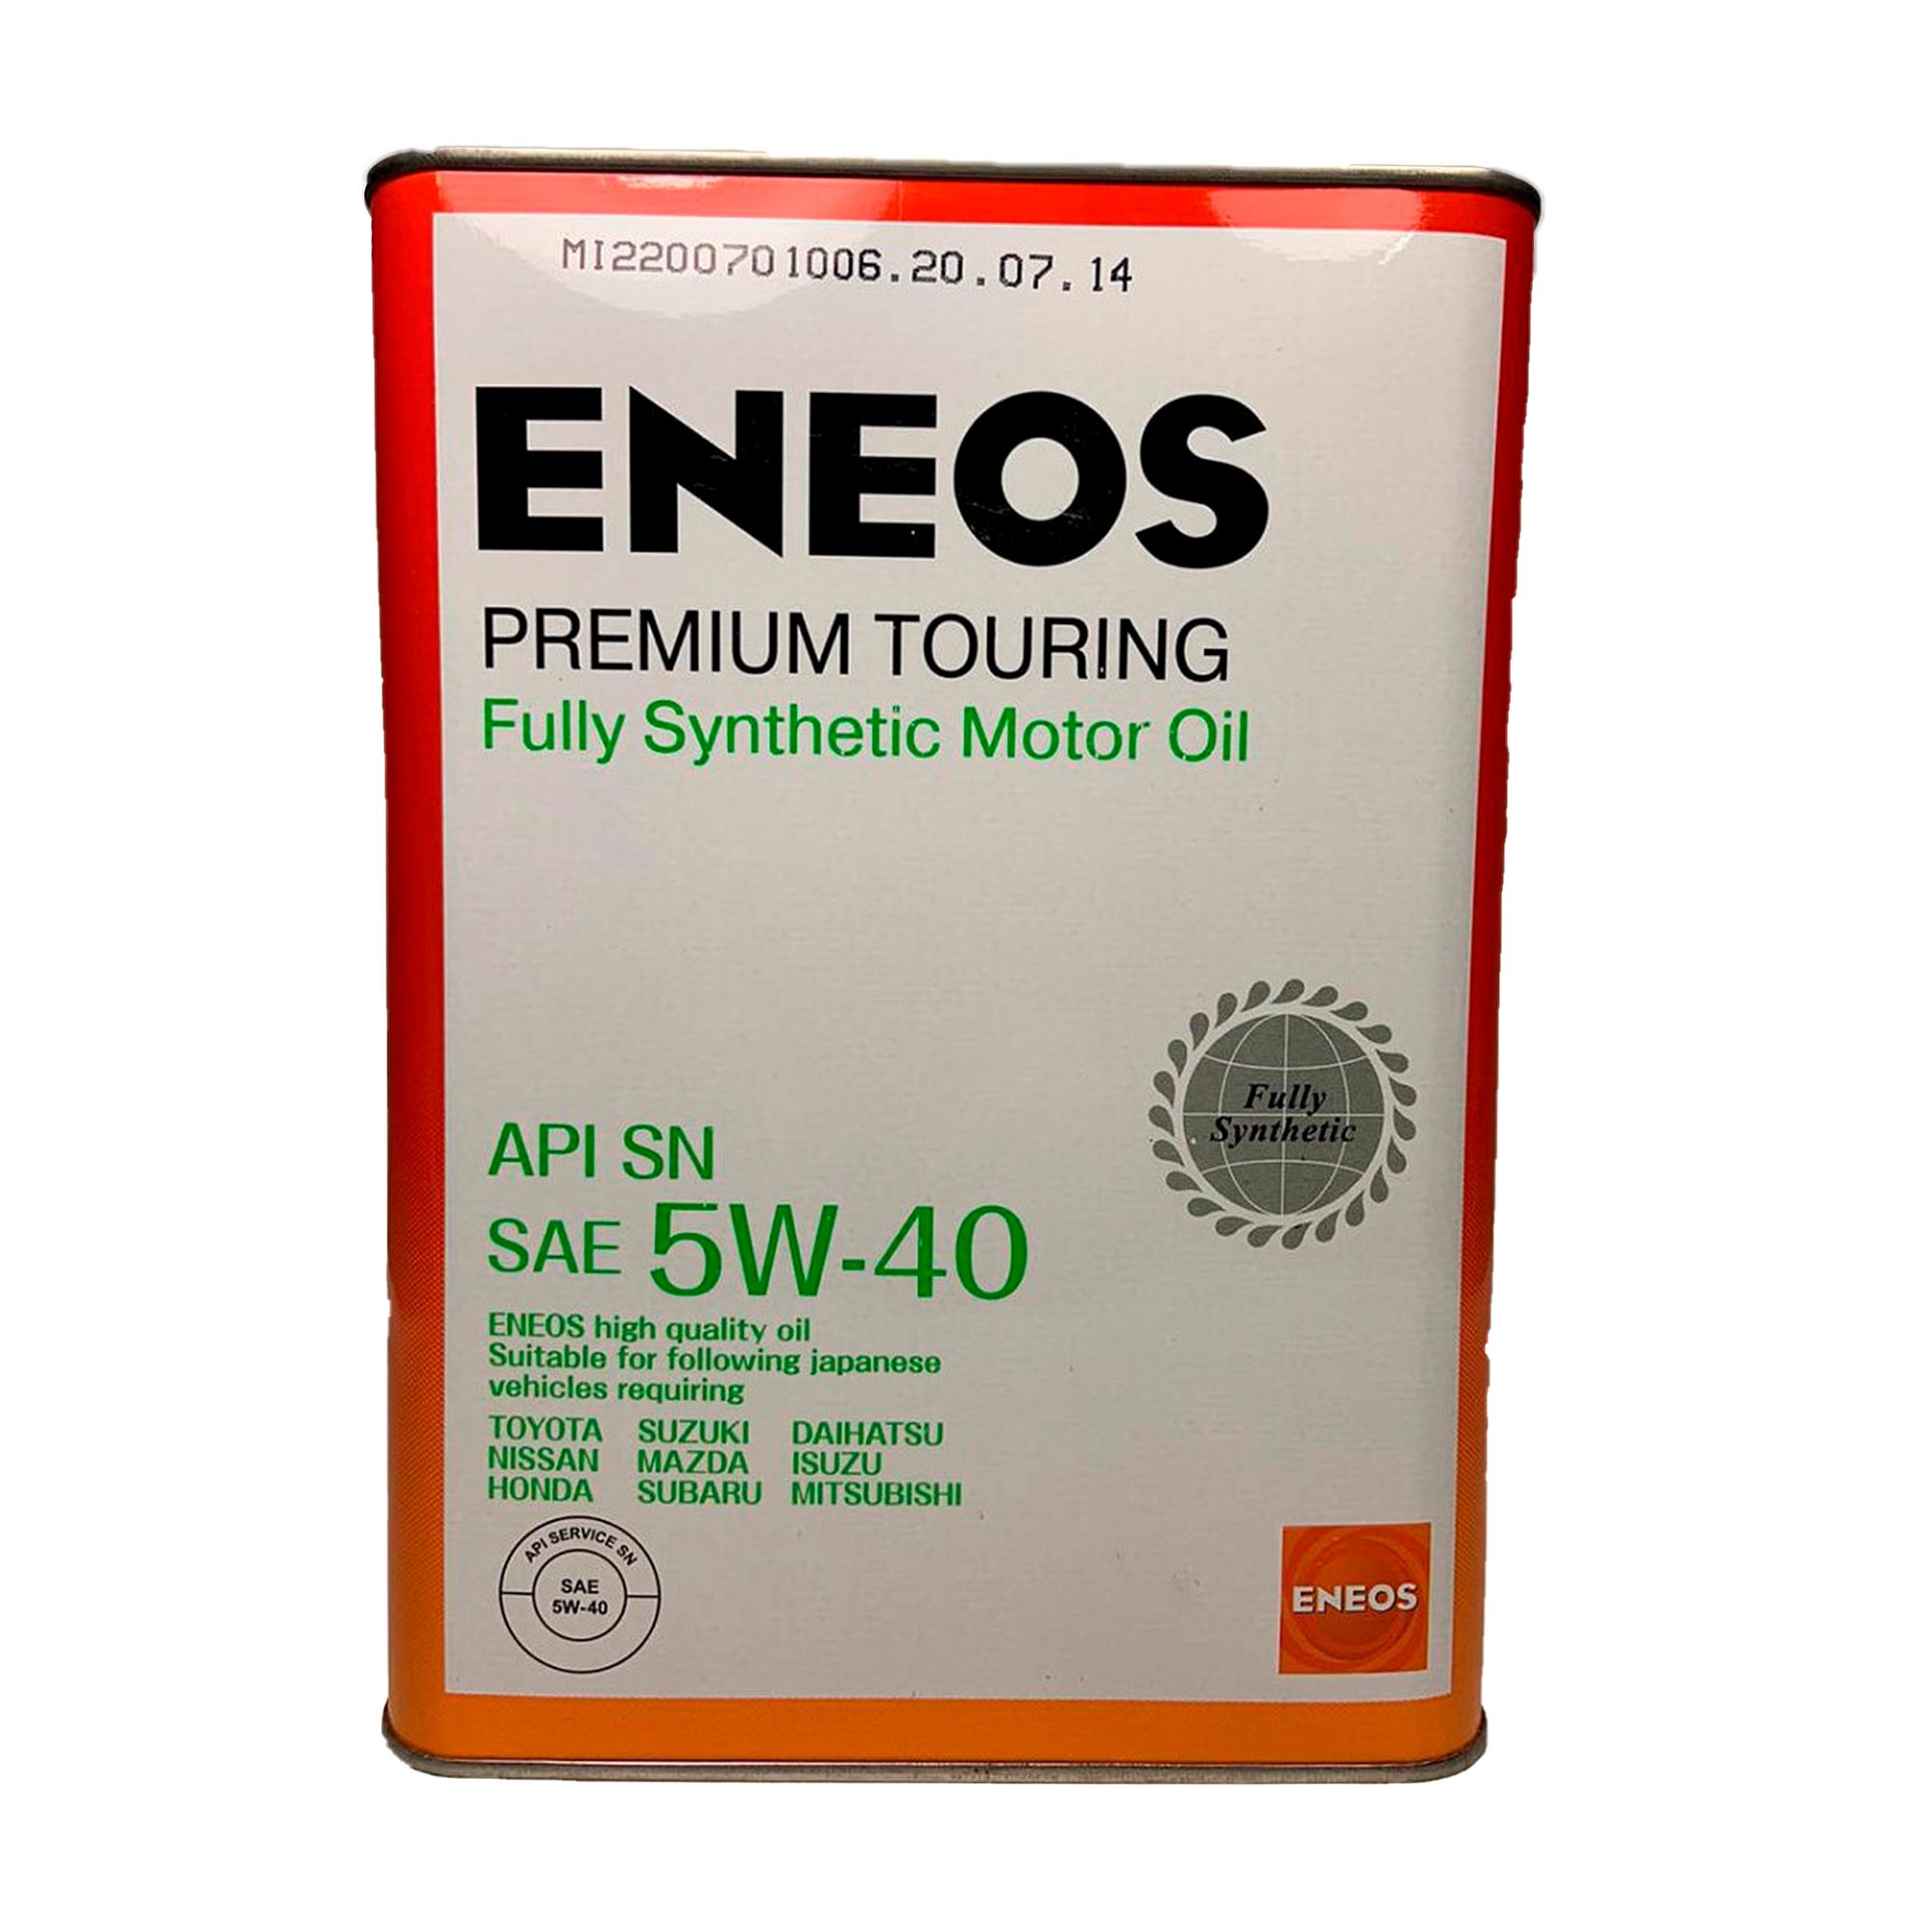 Моторное масло eneos отзывы. ENEOS 5w40. Масло моторное ENEOS Premium Touring SN 5w-40. ENEOS 5w-40 синтетическое. ENEOS Premium Touring 5w-30 синтетическое 4 л.